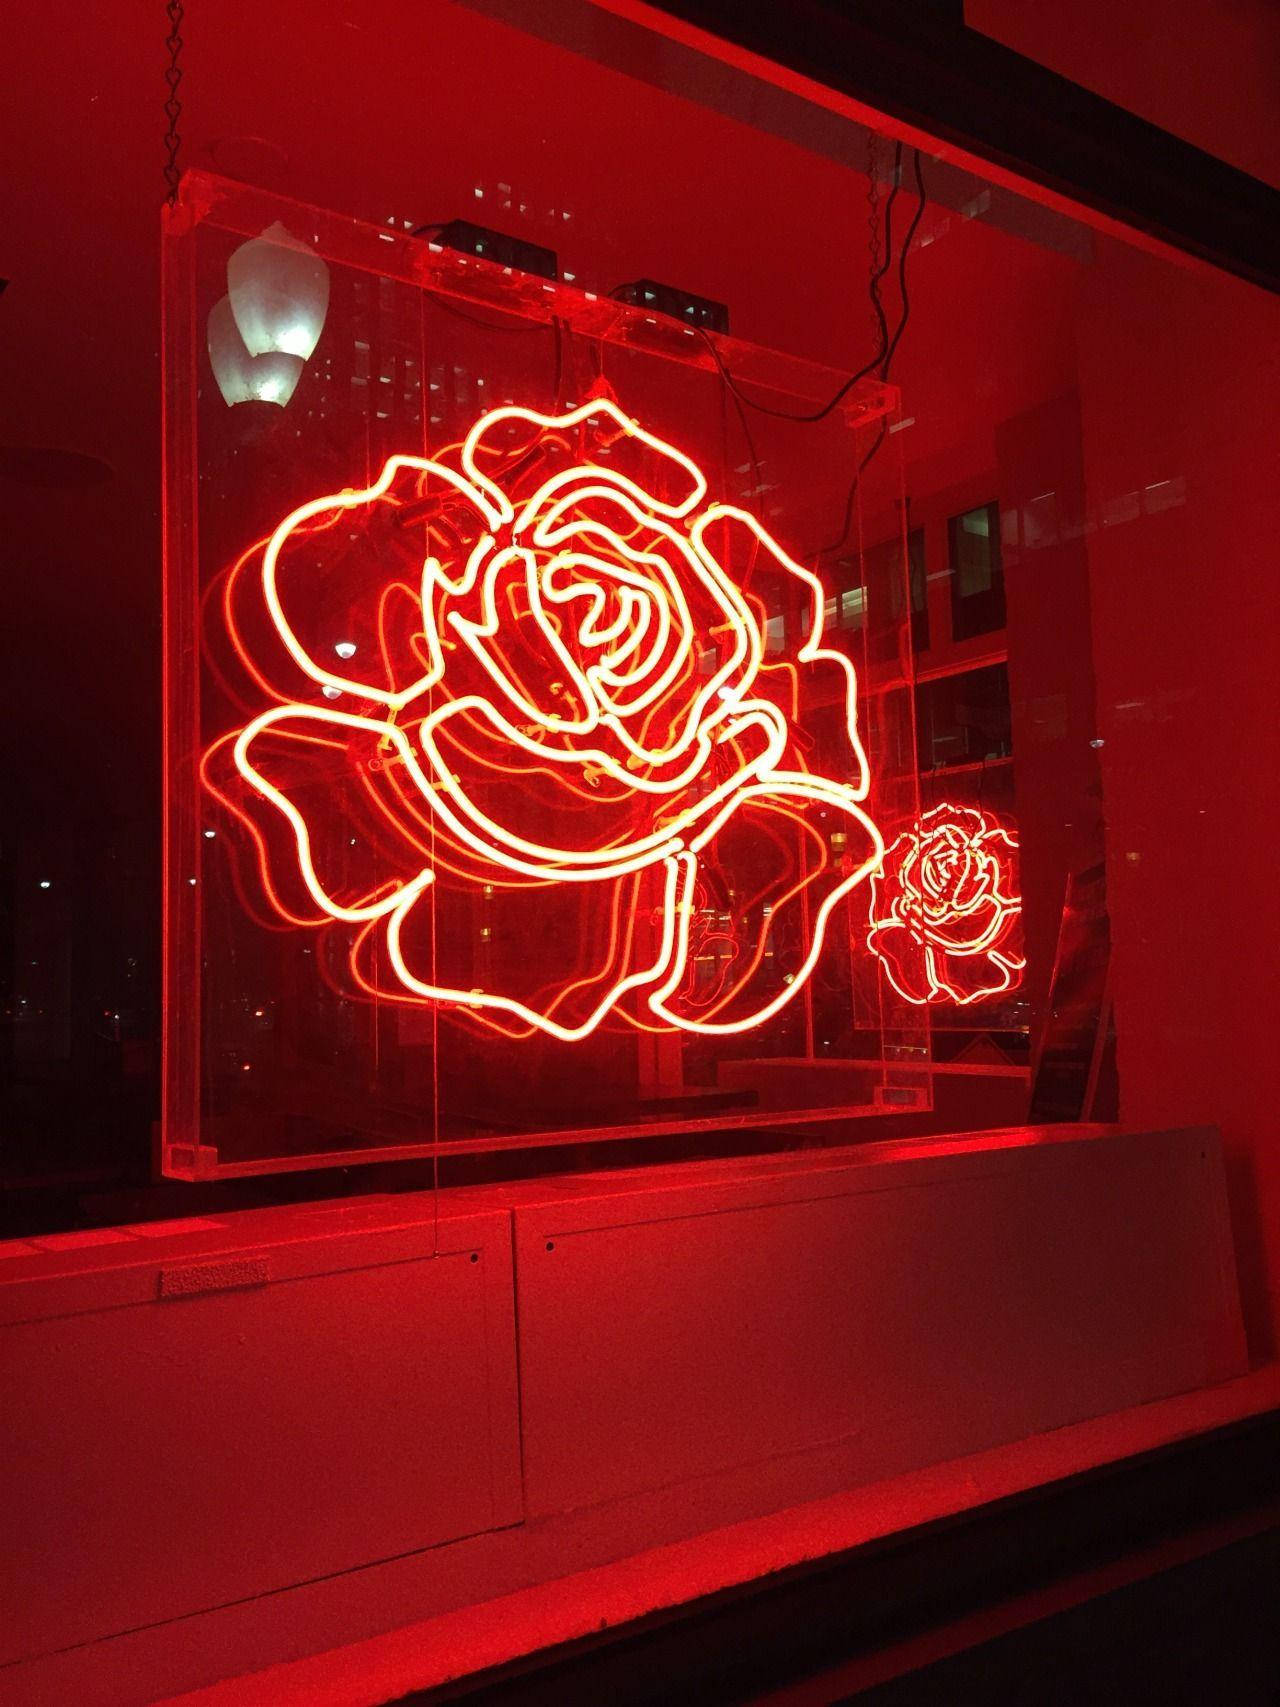 Red Aesthetic Neon Rose Display Background